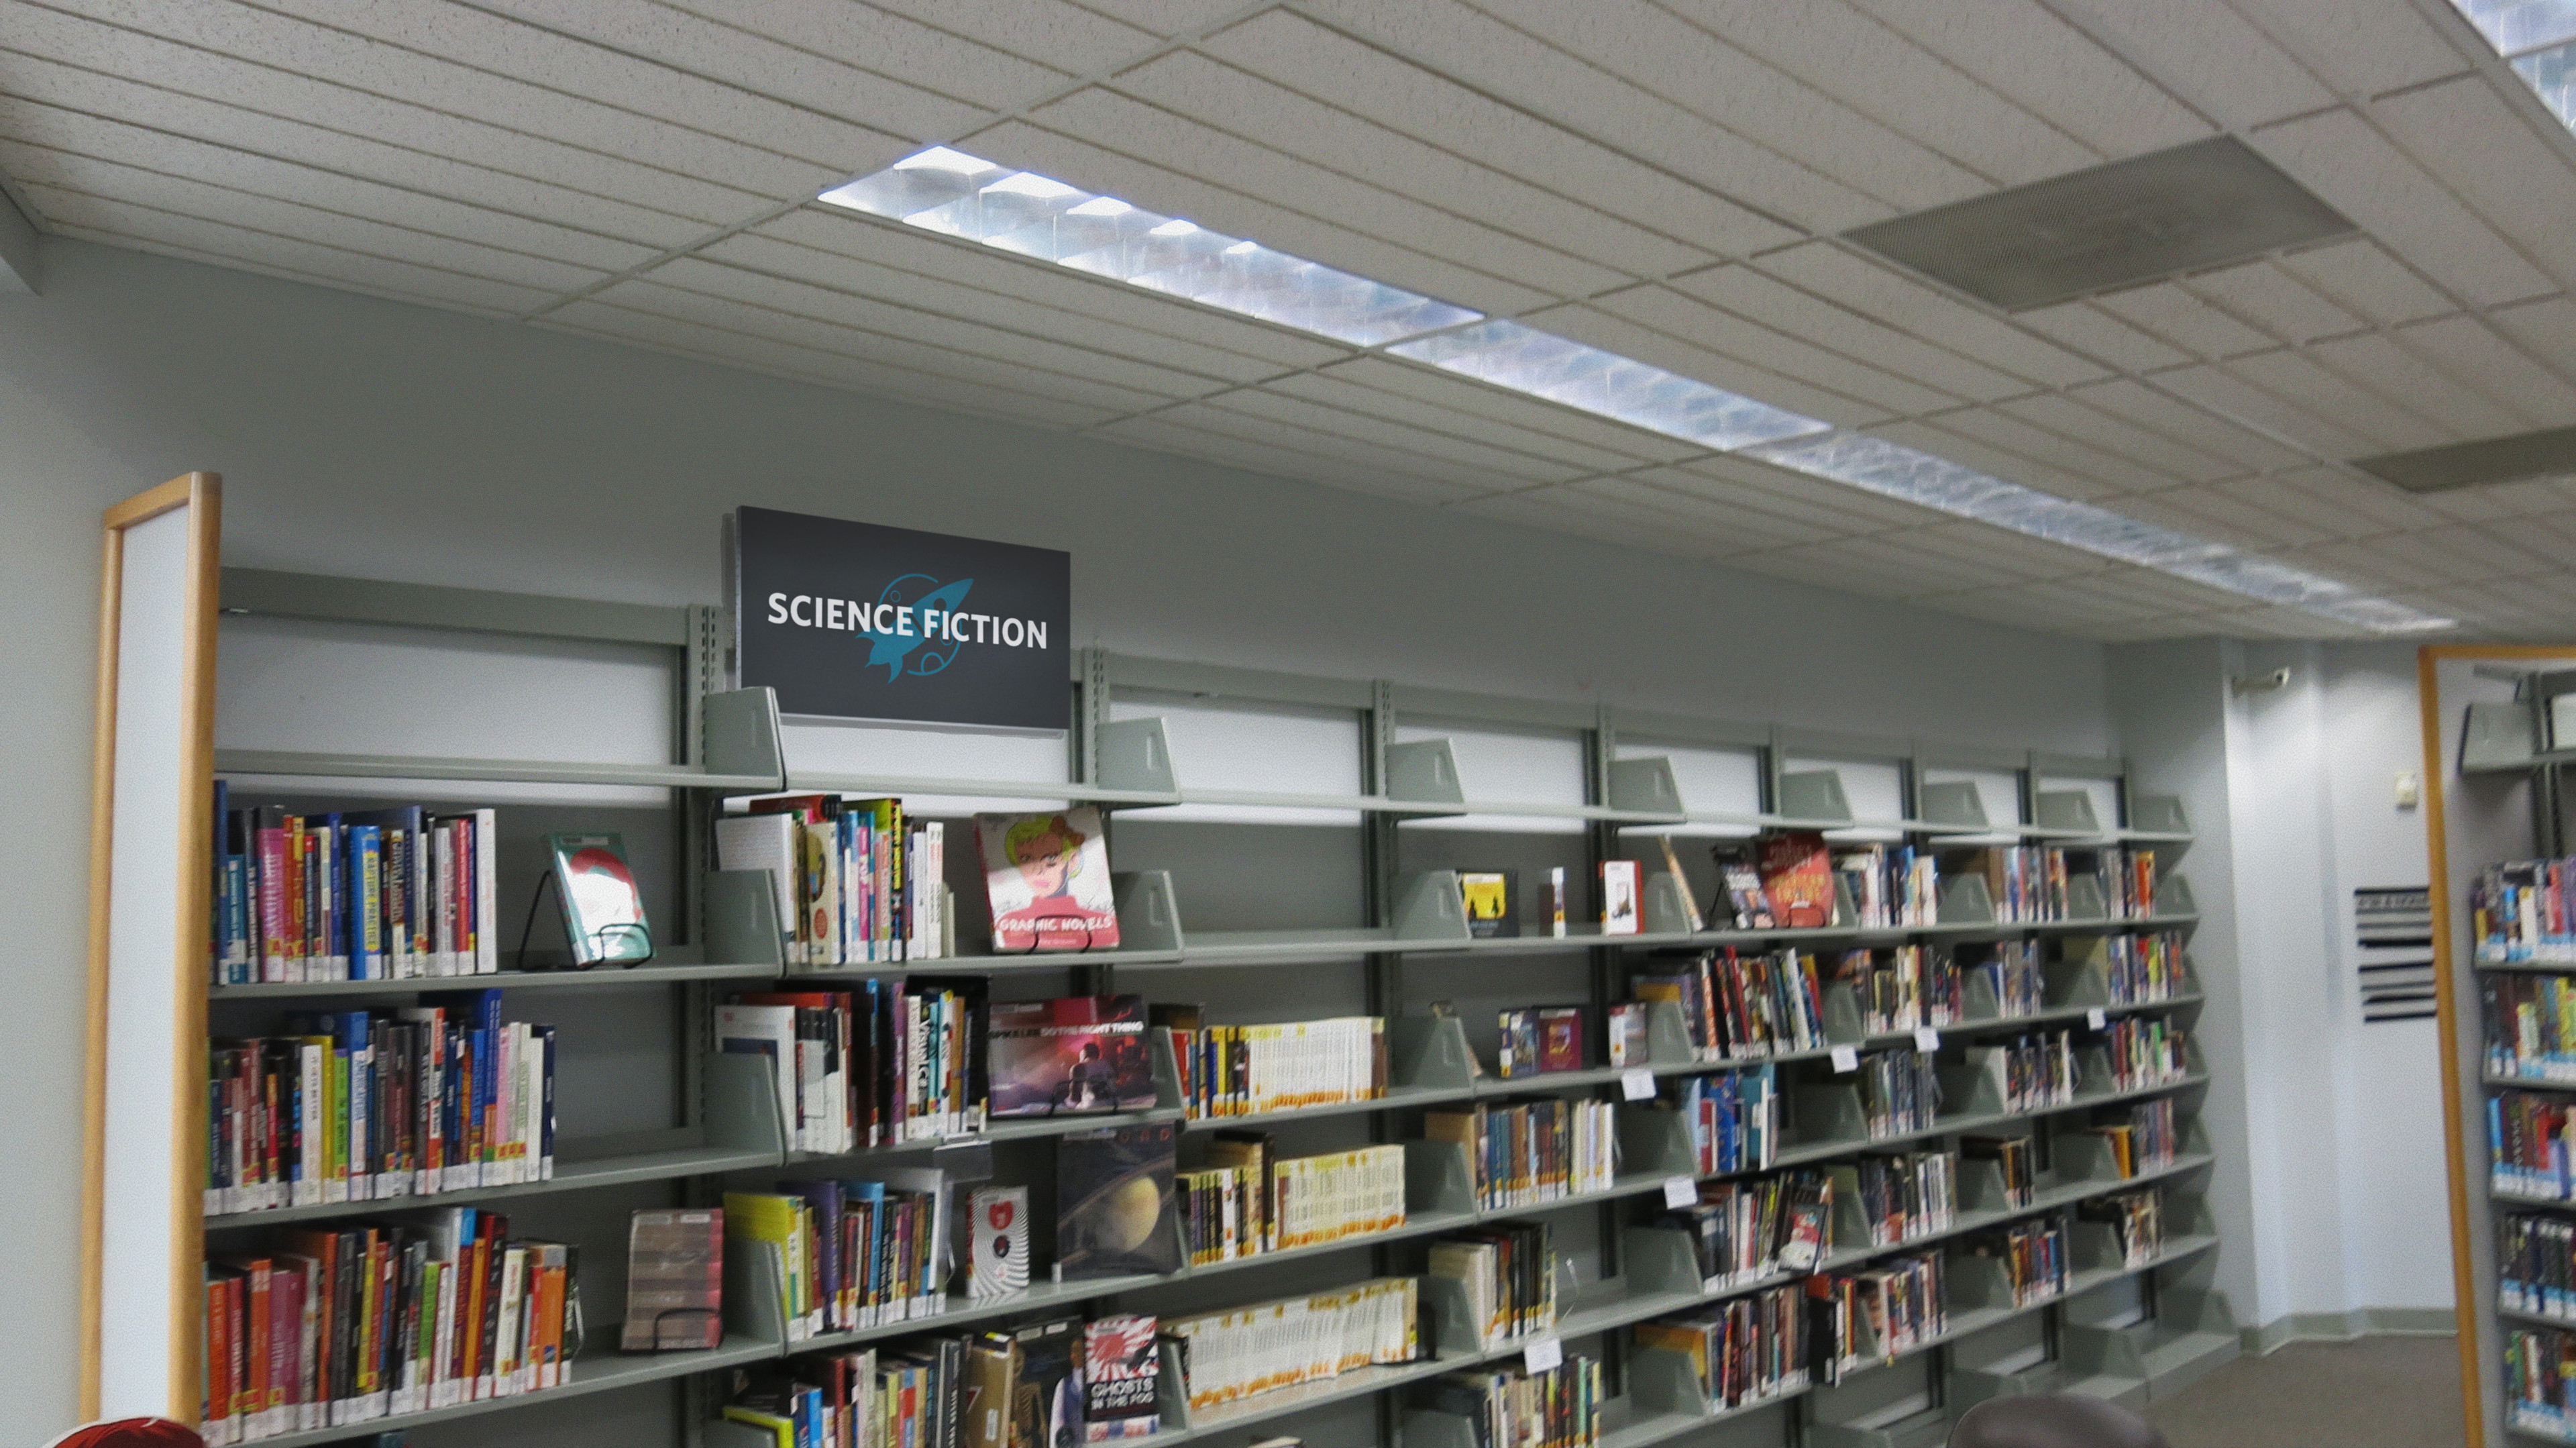 Composited early design onto the walls of the library.